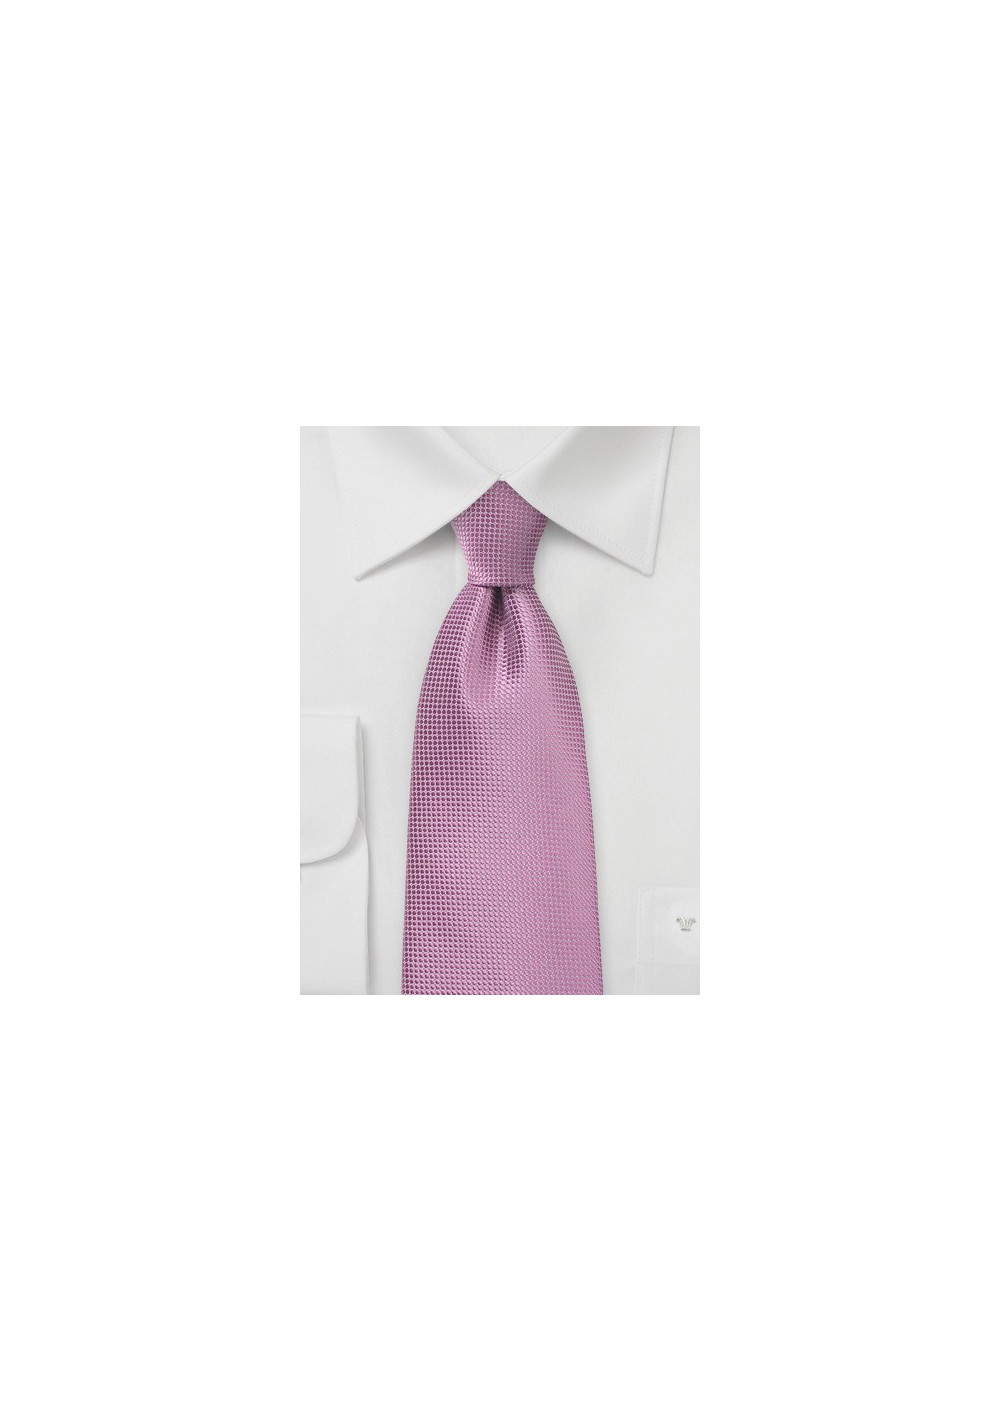 Solid Textured Tie in Antique Orchid